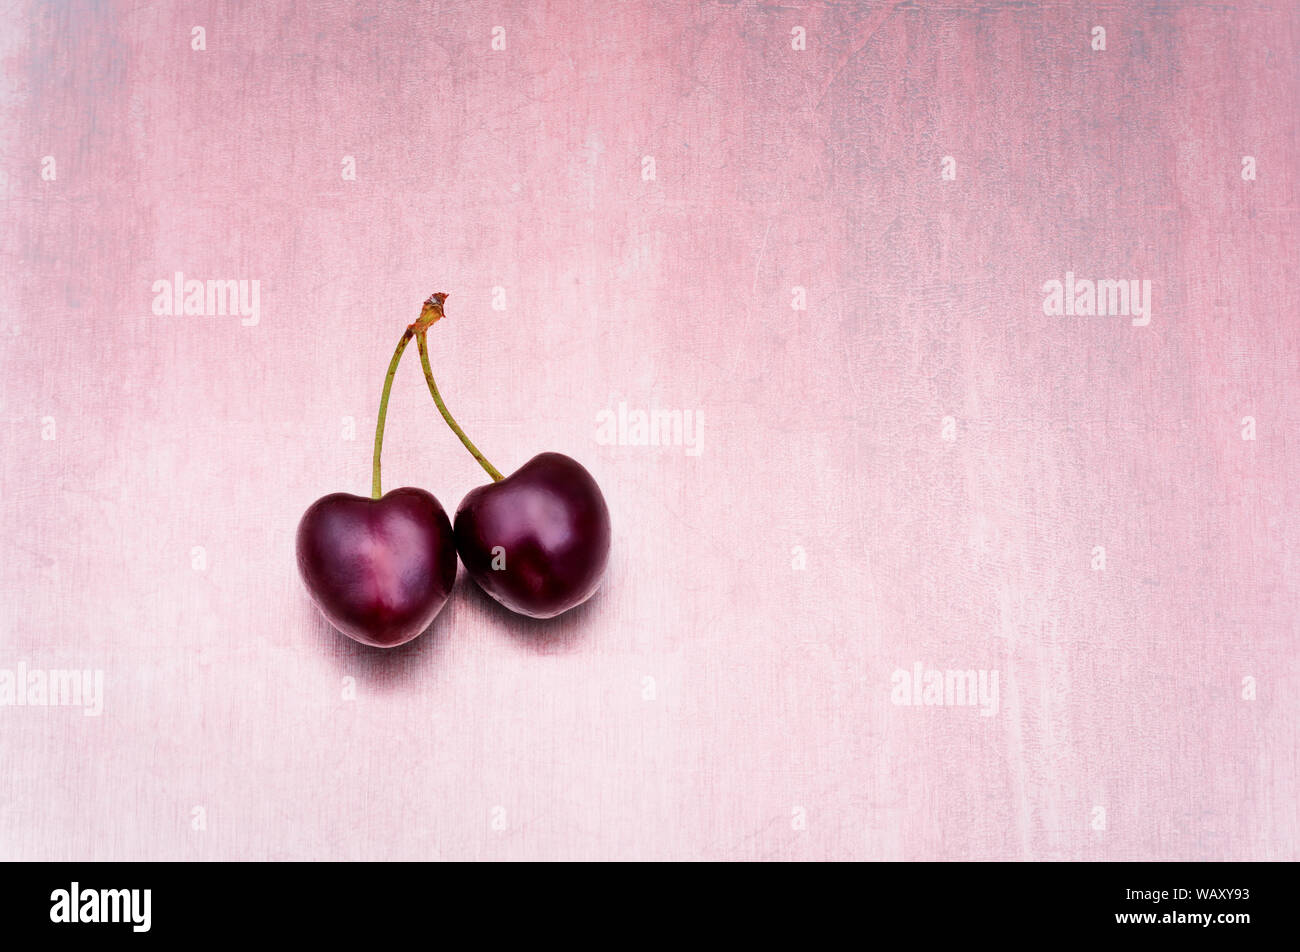 Concept of togetherness in a minimalist image of two cherries one heart shaped joined together against a pink background Stock Photo